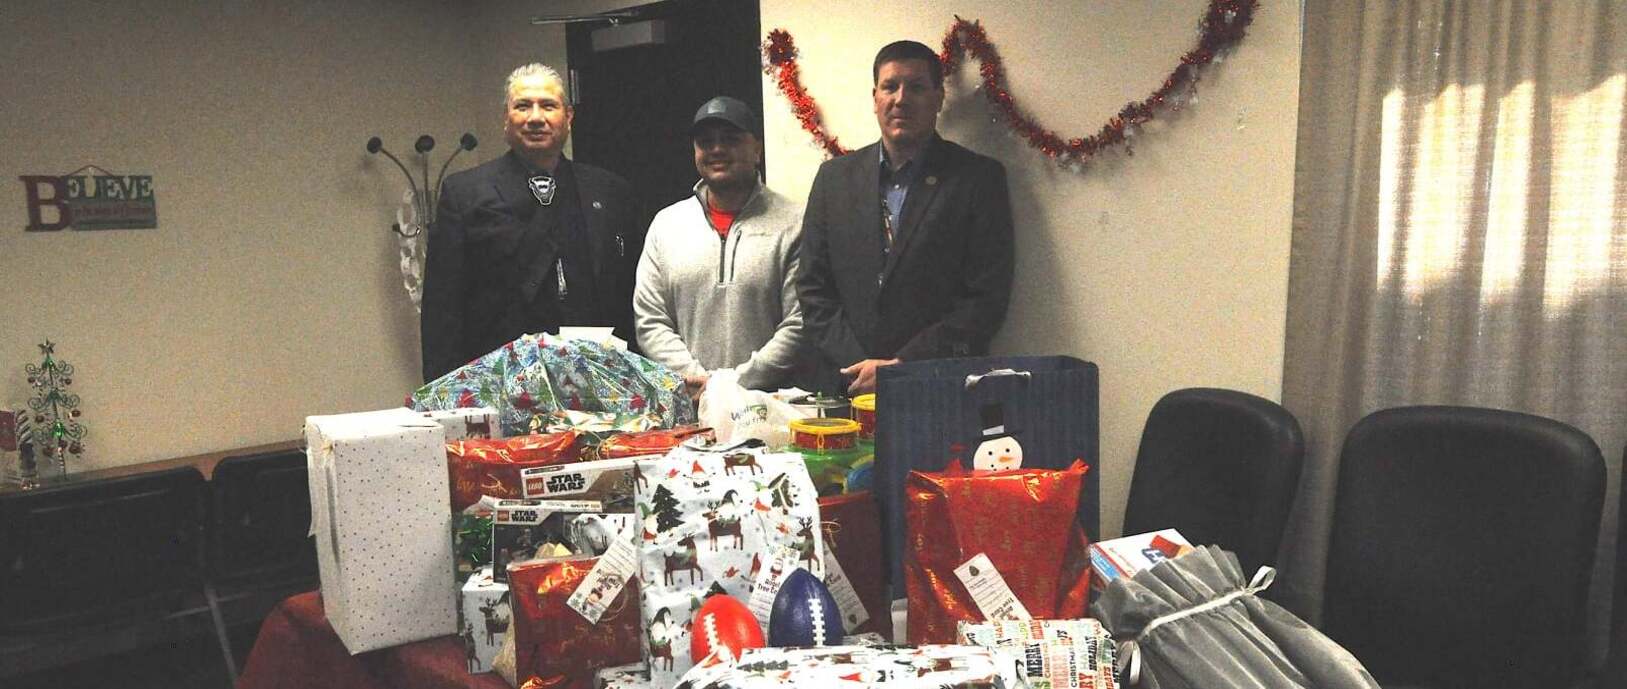 Donated ICW Christmas gifts